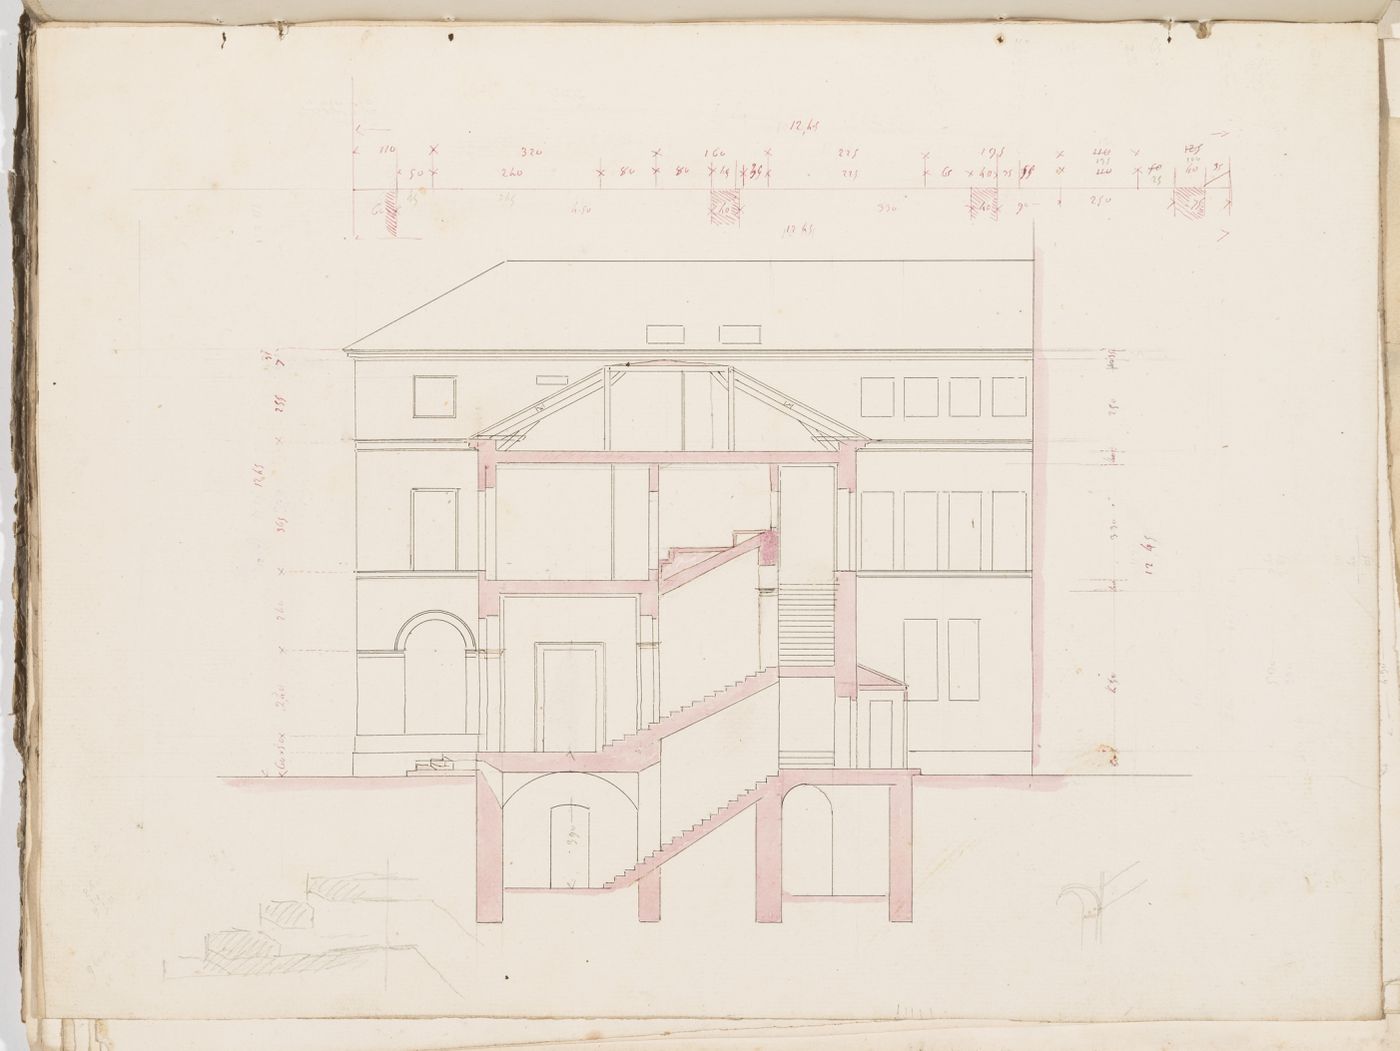 Project no. 7 for a country house for comte Treilhard: Cross section